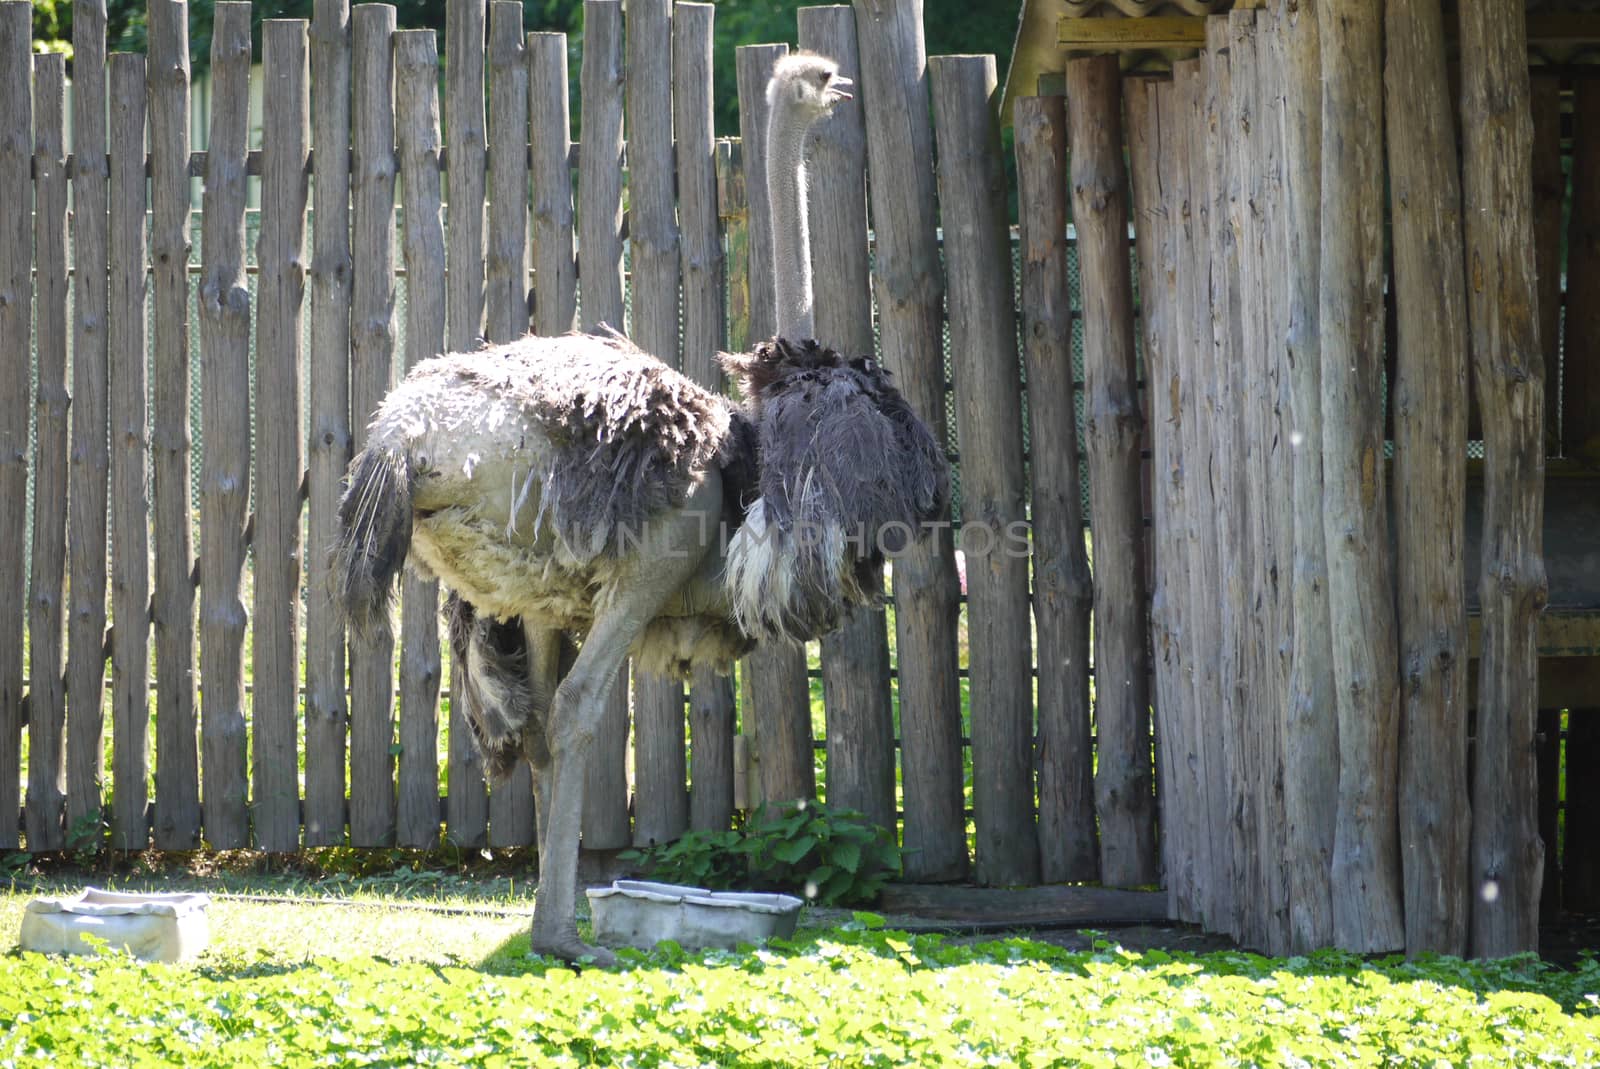 a large ostrich stands on the grass near the feeders in front of a wooden fence. zoo, nature reserve, place of family rest with children